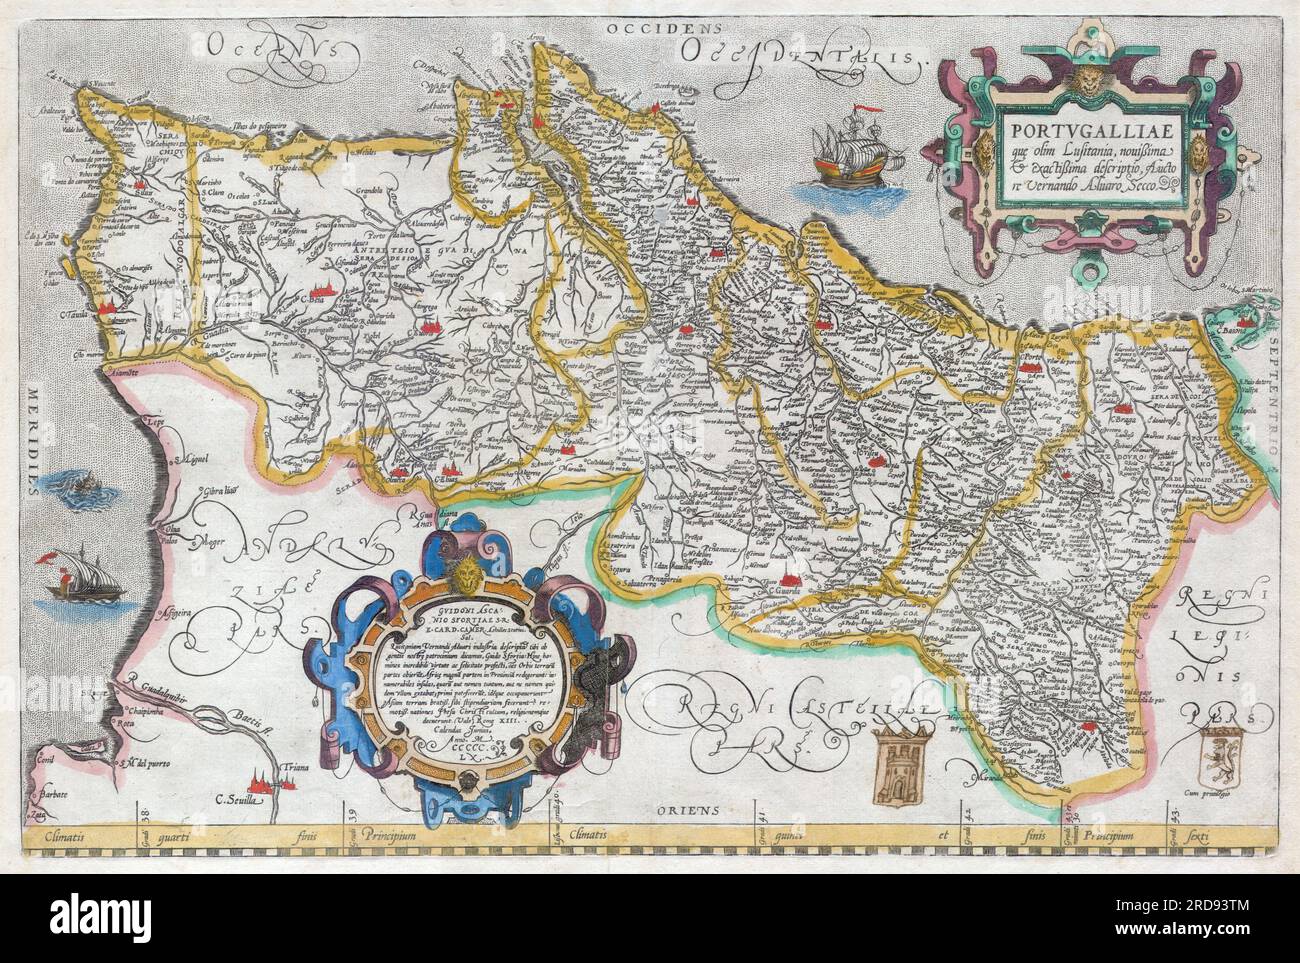 1579 Abraham Ortelius map of the Kingdom of Portugal. Follows the extremely rare two sheet Alavaraz Secco map published by Michele Tramezzino in 1561. North oriented to the right. Sea decorated with monsters and sailing ships. Bottom right features two hand drawn heraldic emblems. Features two elaborate cartouches in the top right and bottom left. Top right cartouche contains the map title in Latin, translated above. Bottom left cartouche include the following roughly translated text: Achilles Statius salutes Guido Ascanius Sfortia, S.R.E. Card. Camer. With dedication the Lusitania of Vernandu Stock Photo